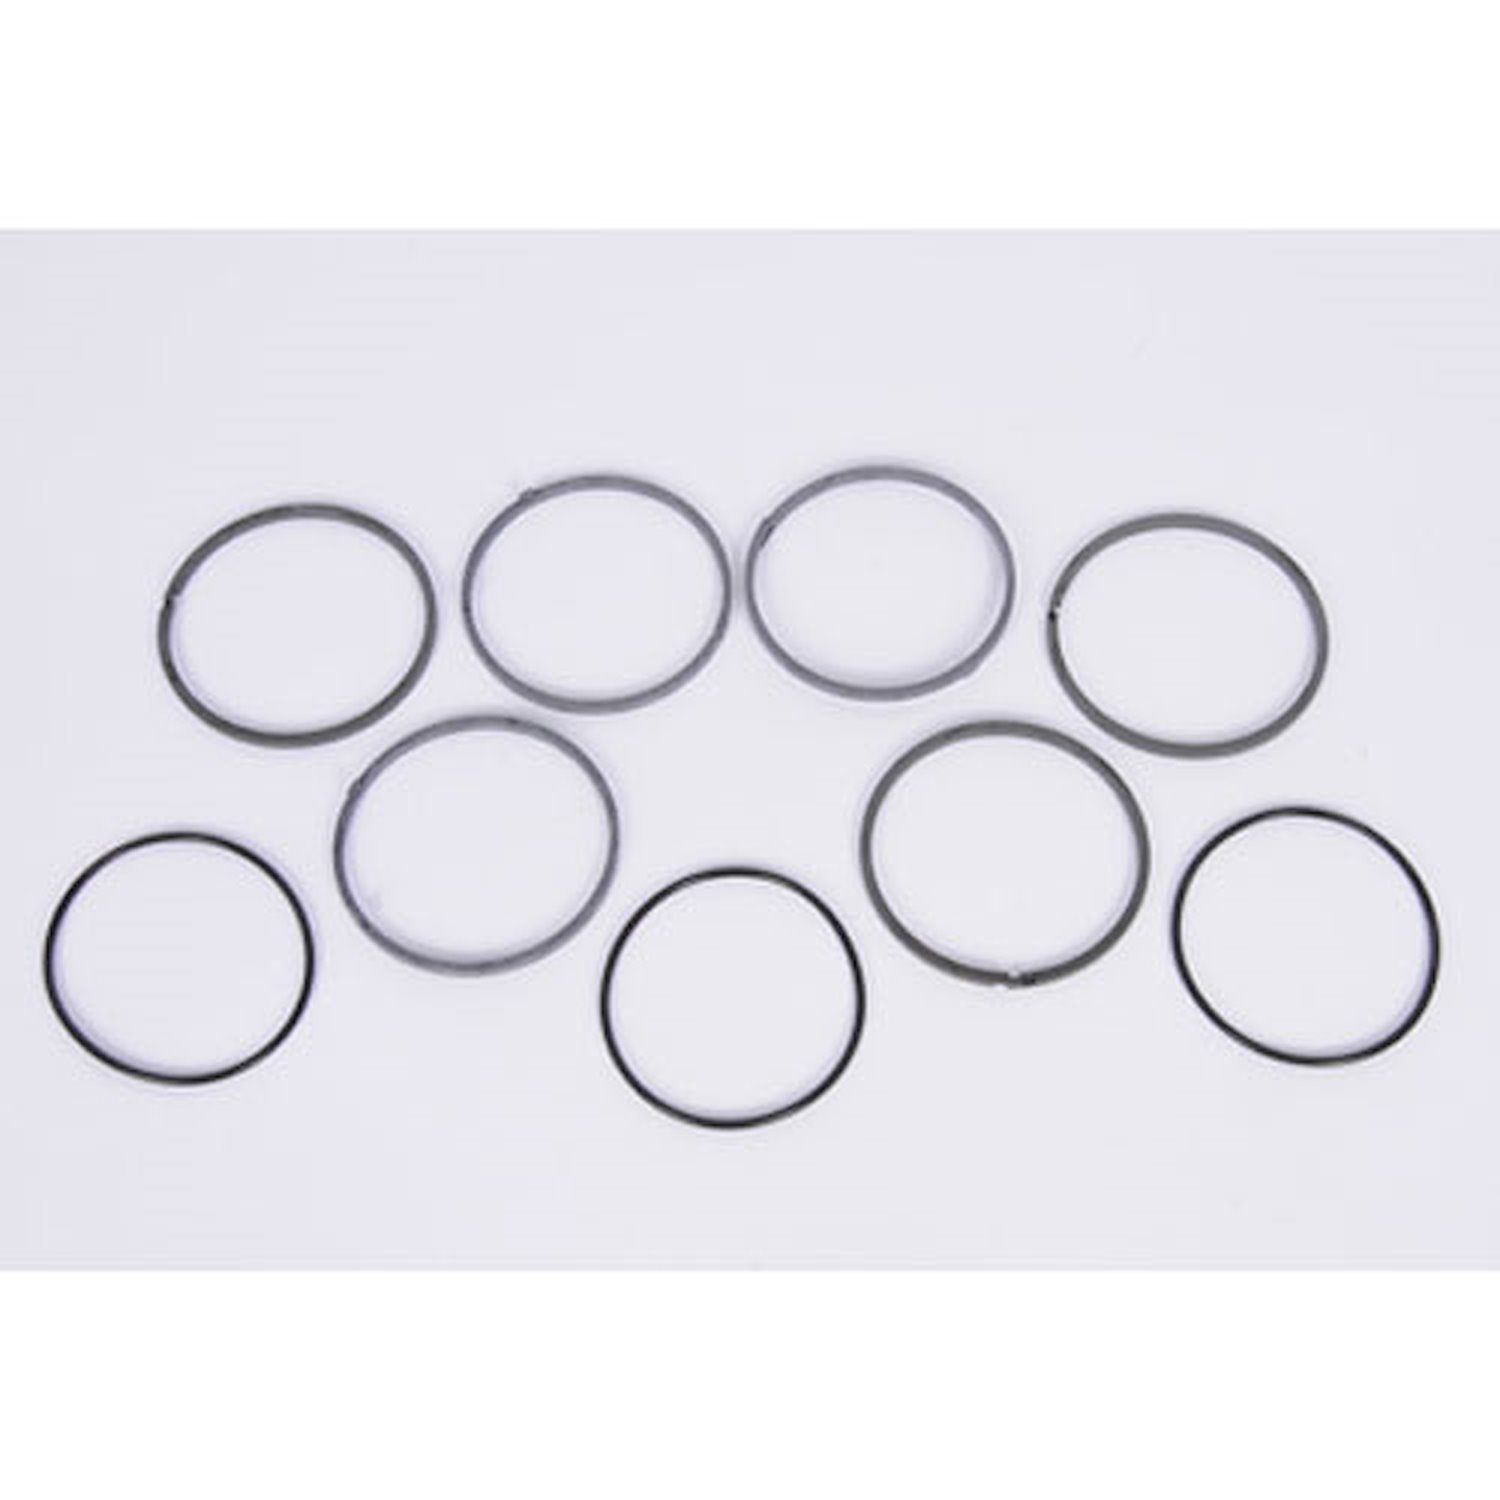 Automatic Transmission 1-2-3-4 and 3-5-Reverse Clutch Seal Retaining Ring Kit